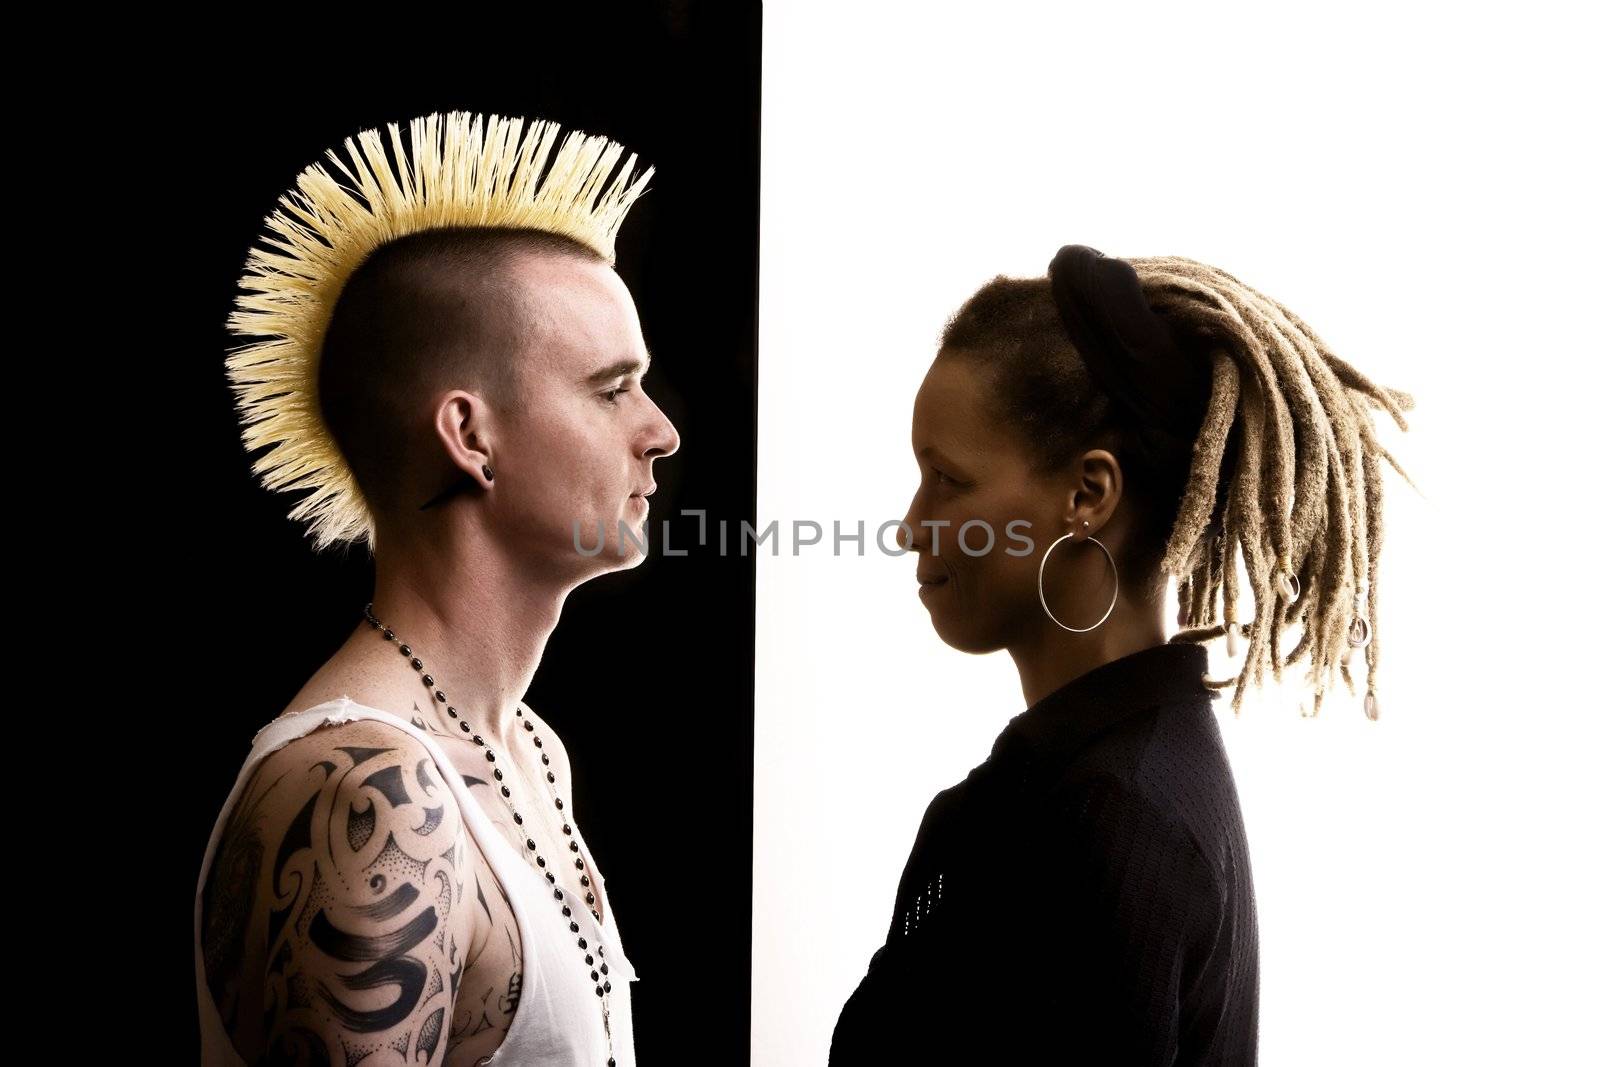 Caucasian Man with Mohawk and African-American Woman with Dreadlocks